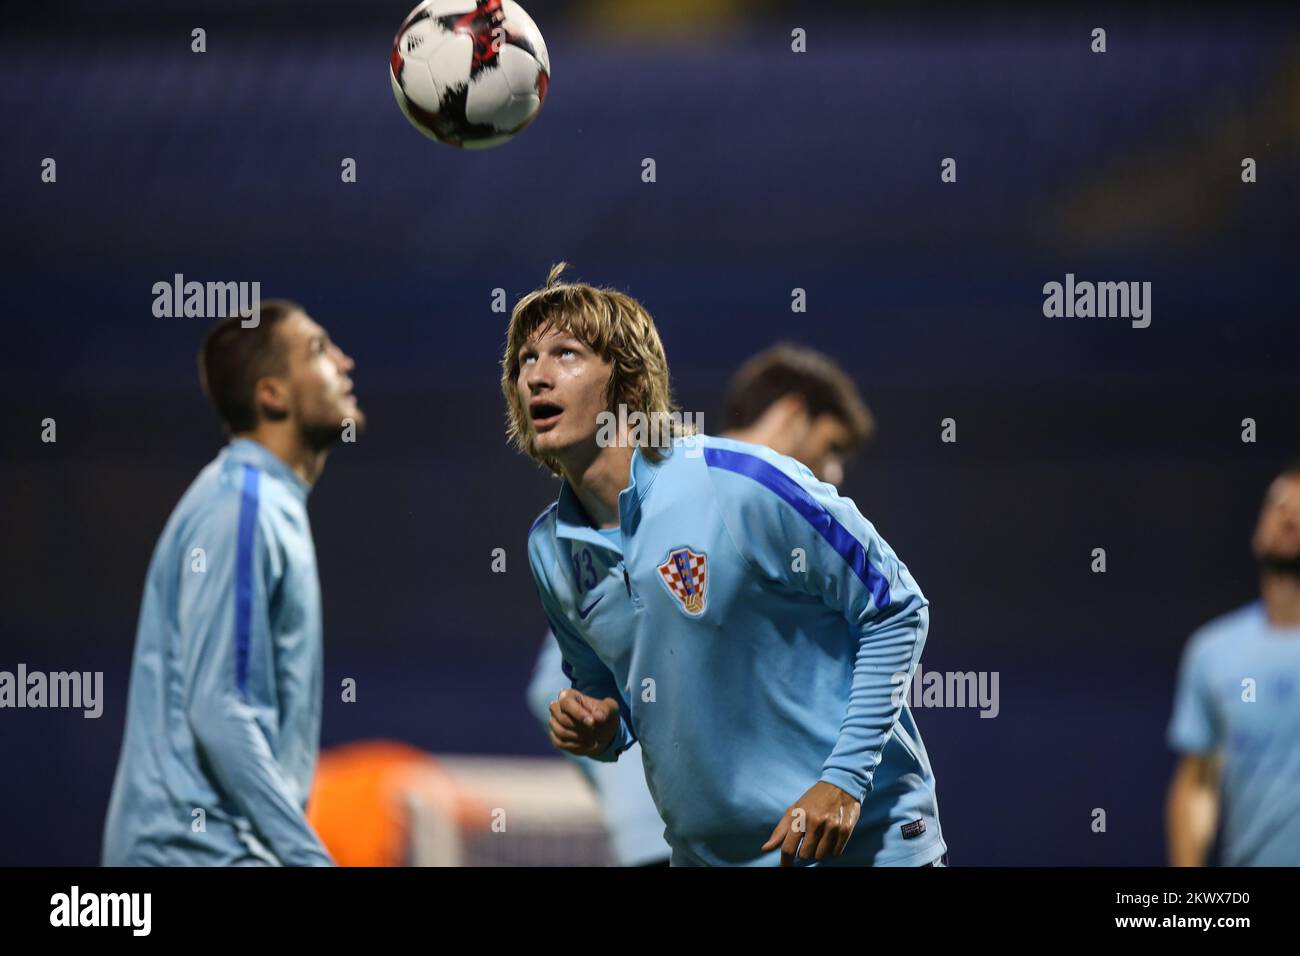 04.09.2016., Zagreb, Stadium Maksimir, Croatia - Croatian national football team training before the qualifying football match with Turkey for the World Cup in Russia. Tin Jedvaj.  Stock Photo